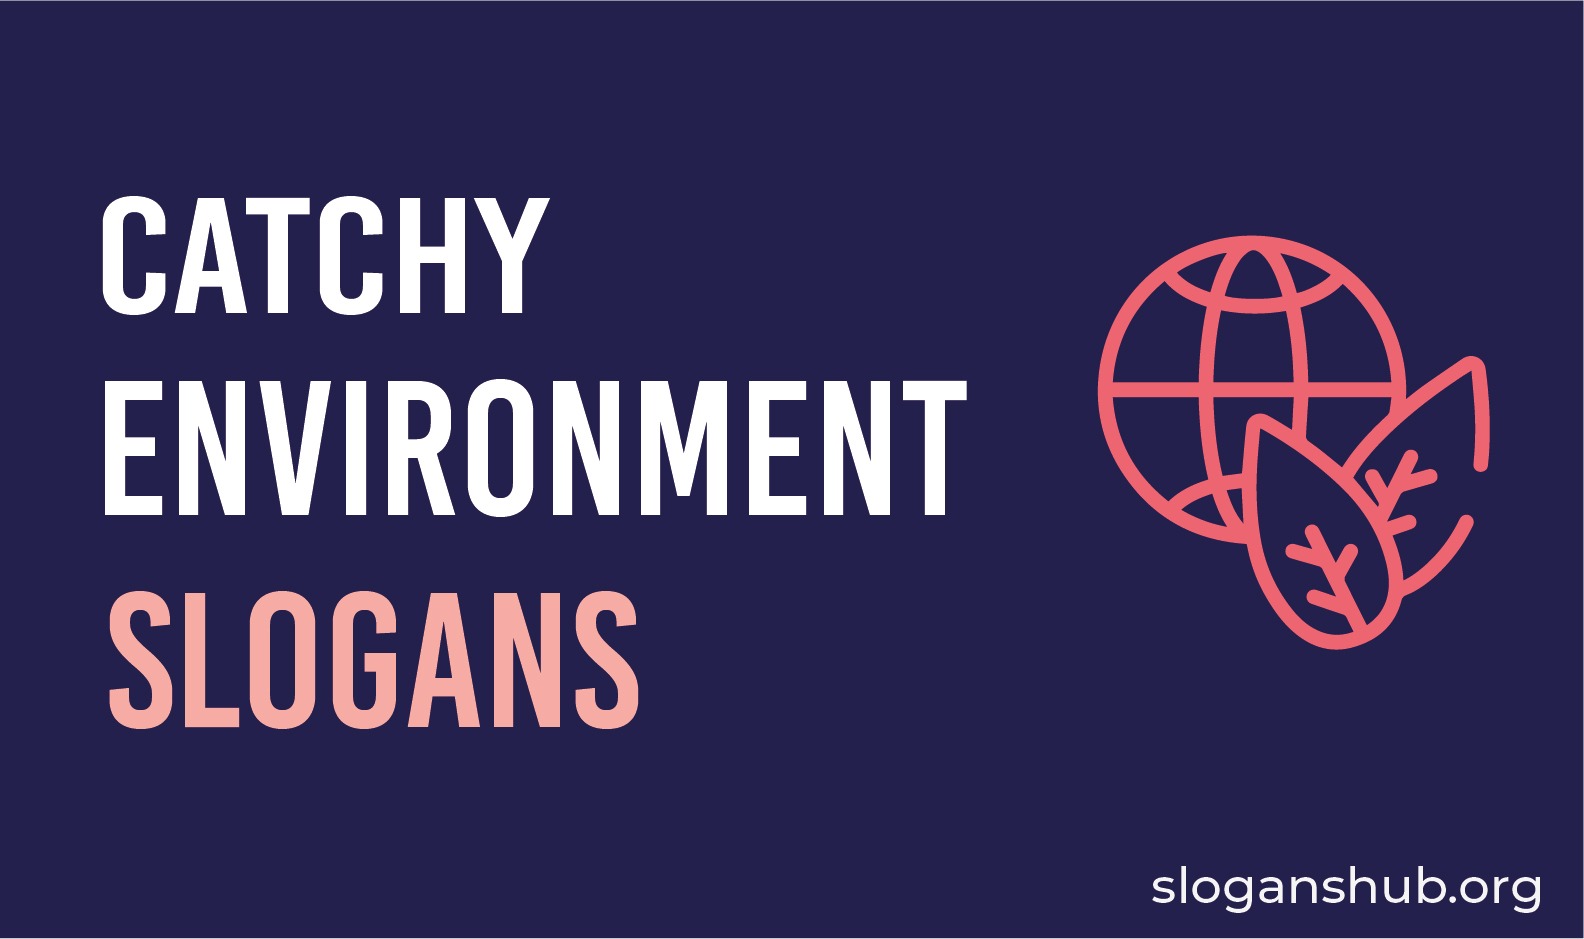 117 Catchy Slogans On Environment With Pictures And Posters